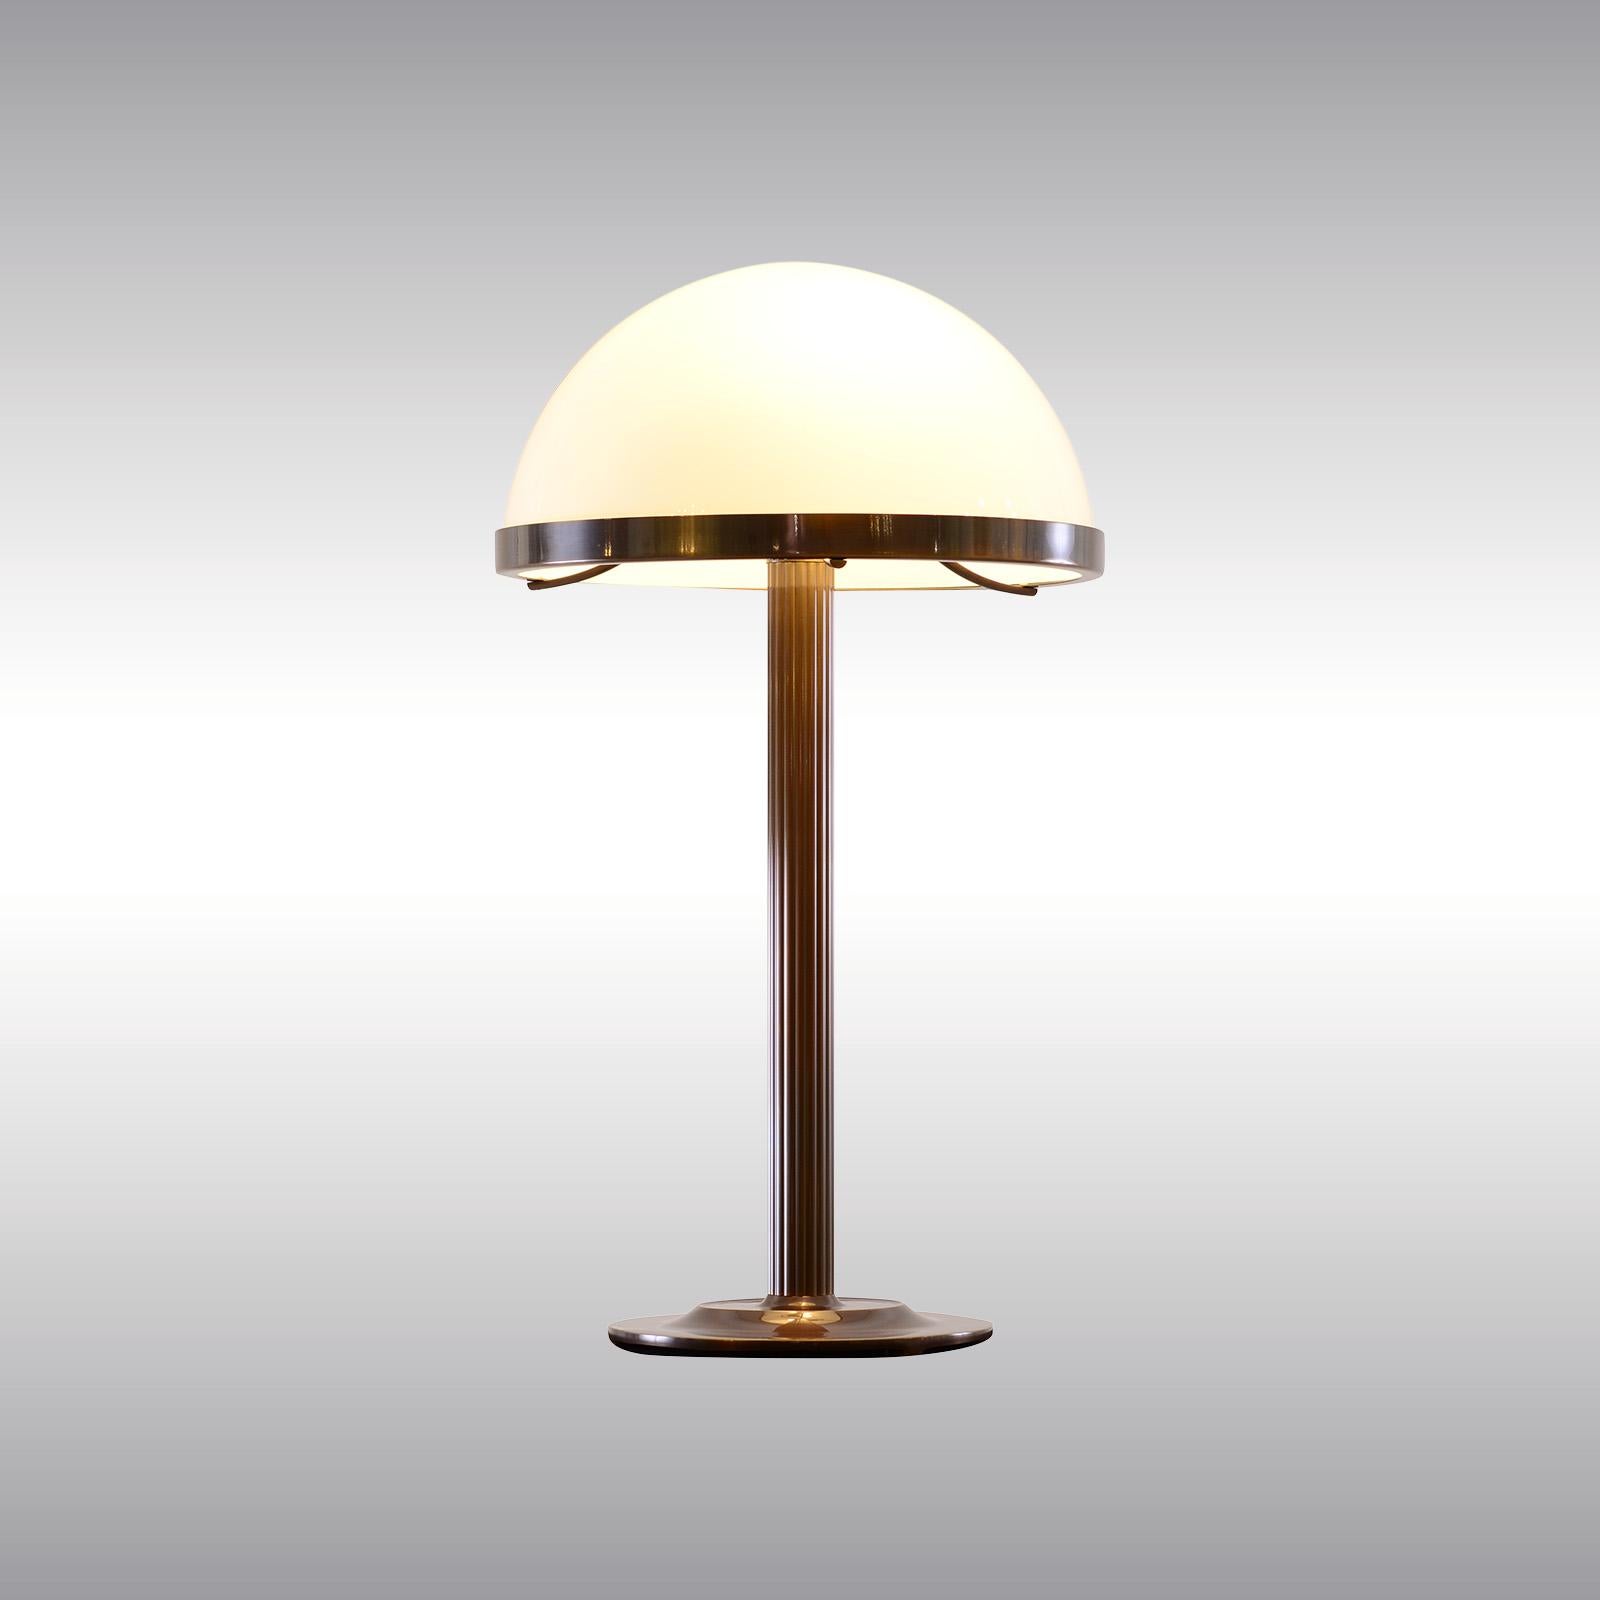 Table light with opaline glass shade, designed for Villa Steiner

Most components according to the UL regulations, with an additional charge we will UL-list and label our fixtures. 

Now manufactured at the WOKA workshop in Vienna.